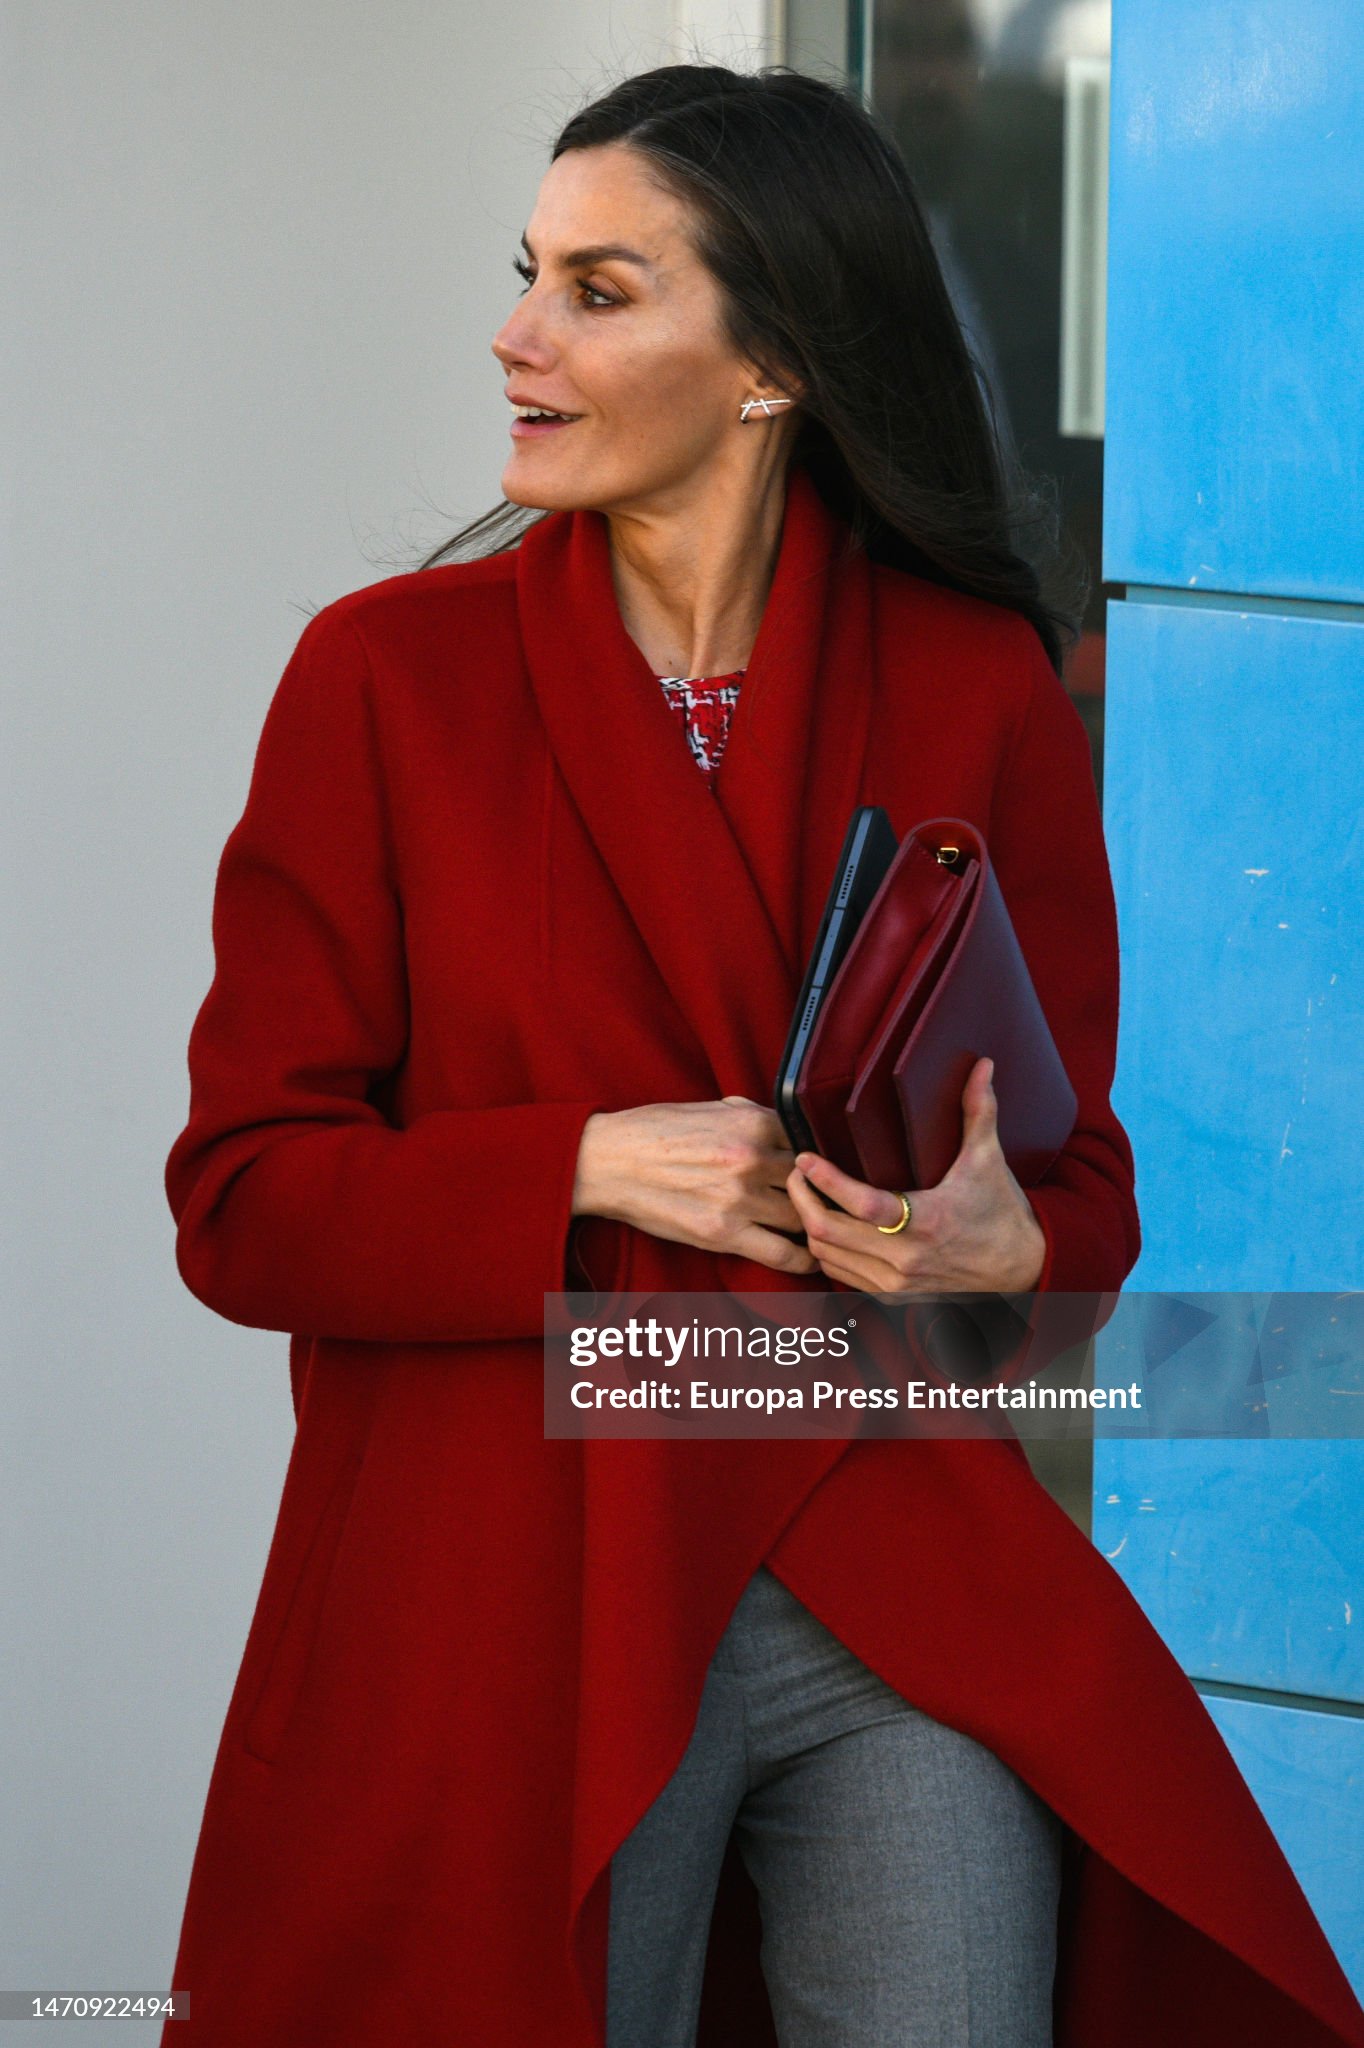 queen-letizia-presides-over-the-meeting-of-the-board-of-trustees-of-the-fundacion-unicef.jpg